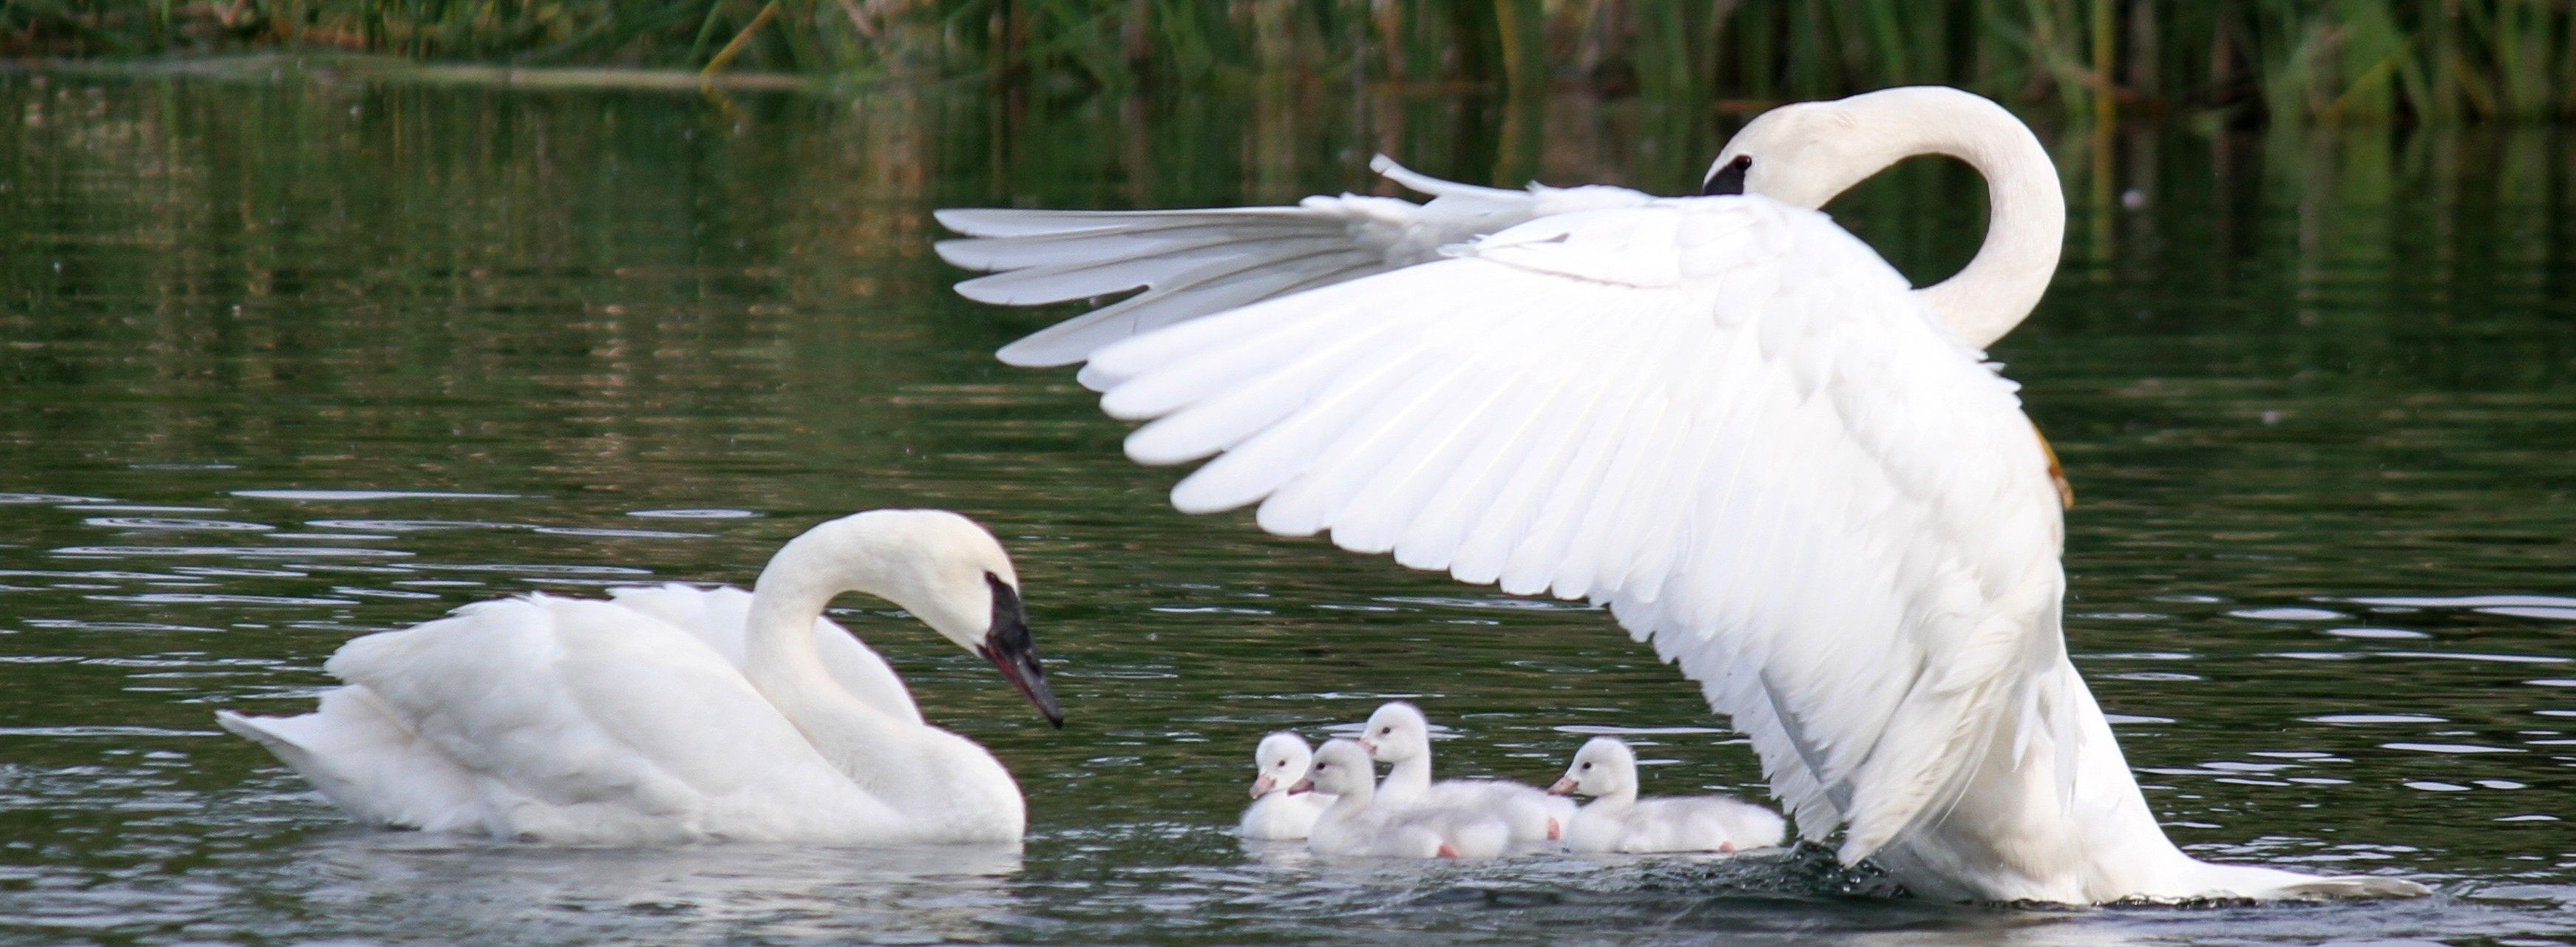 The Trumpeter Swan Society's programs span across North America